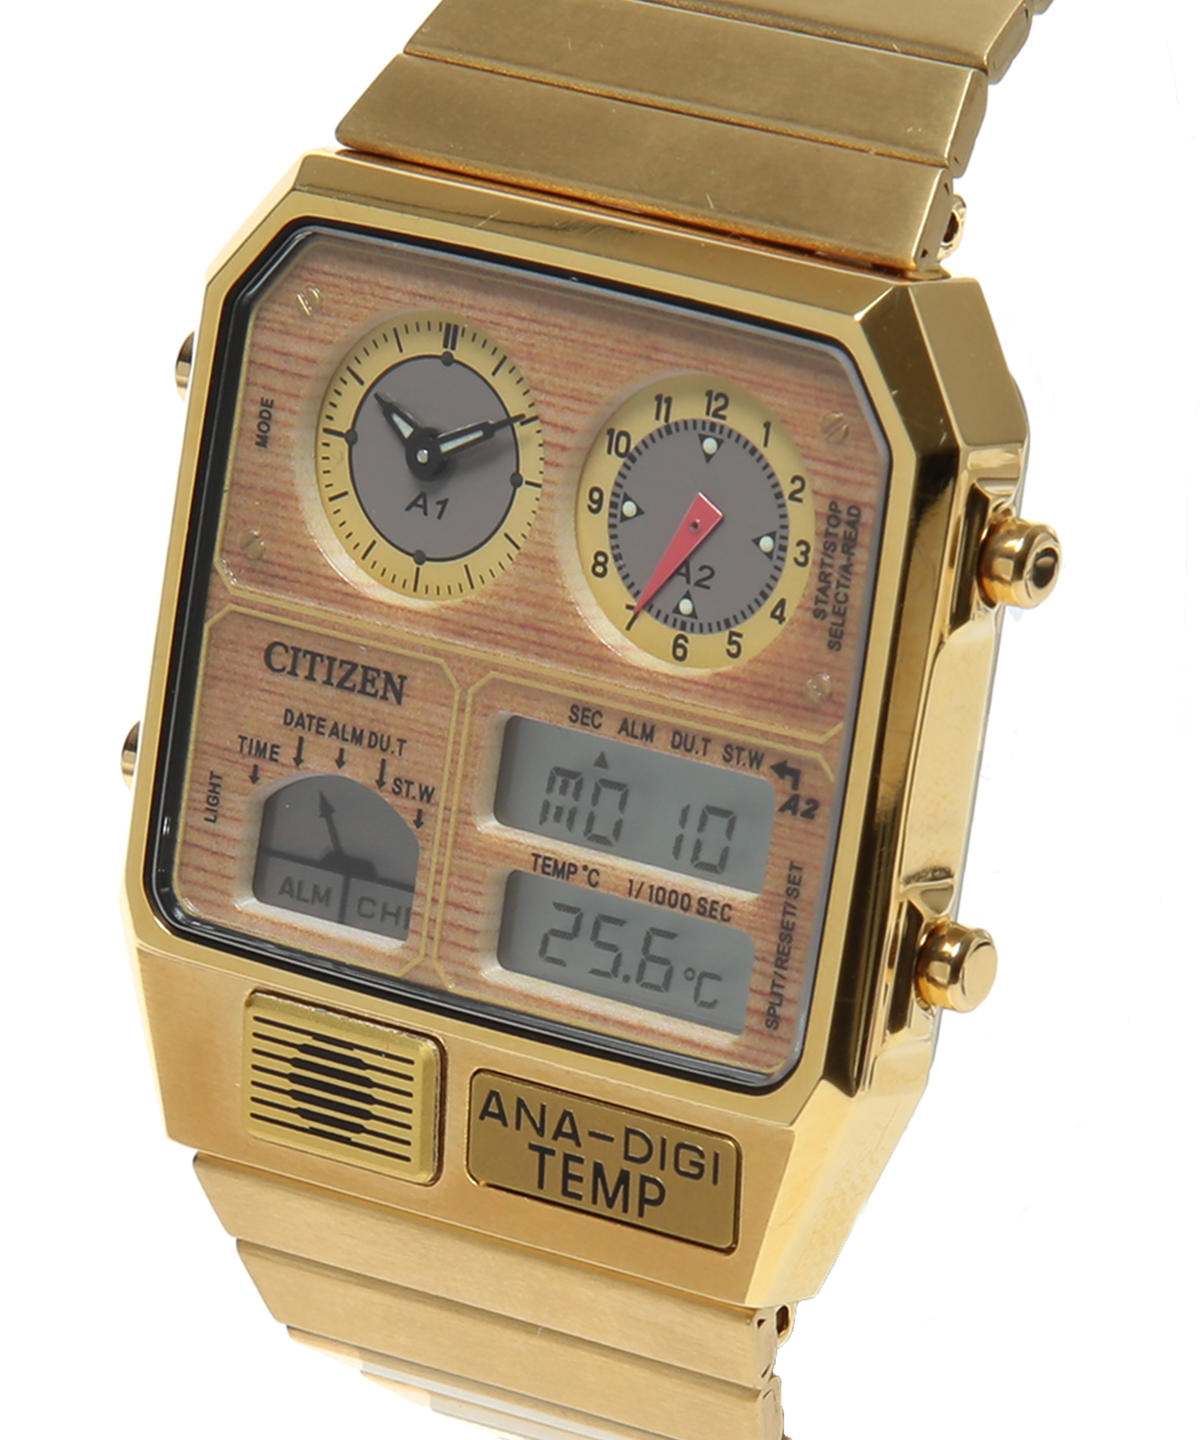 BEAMS JAPAN (BEAMS JAPAN) BEAMS JAPAN / BEAMS JAPAN original Chinese  numeral watch (clock wristwatch) mail order | BEAMS